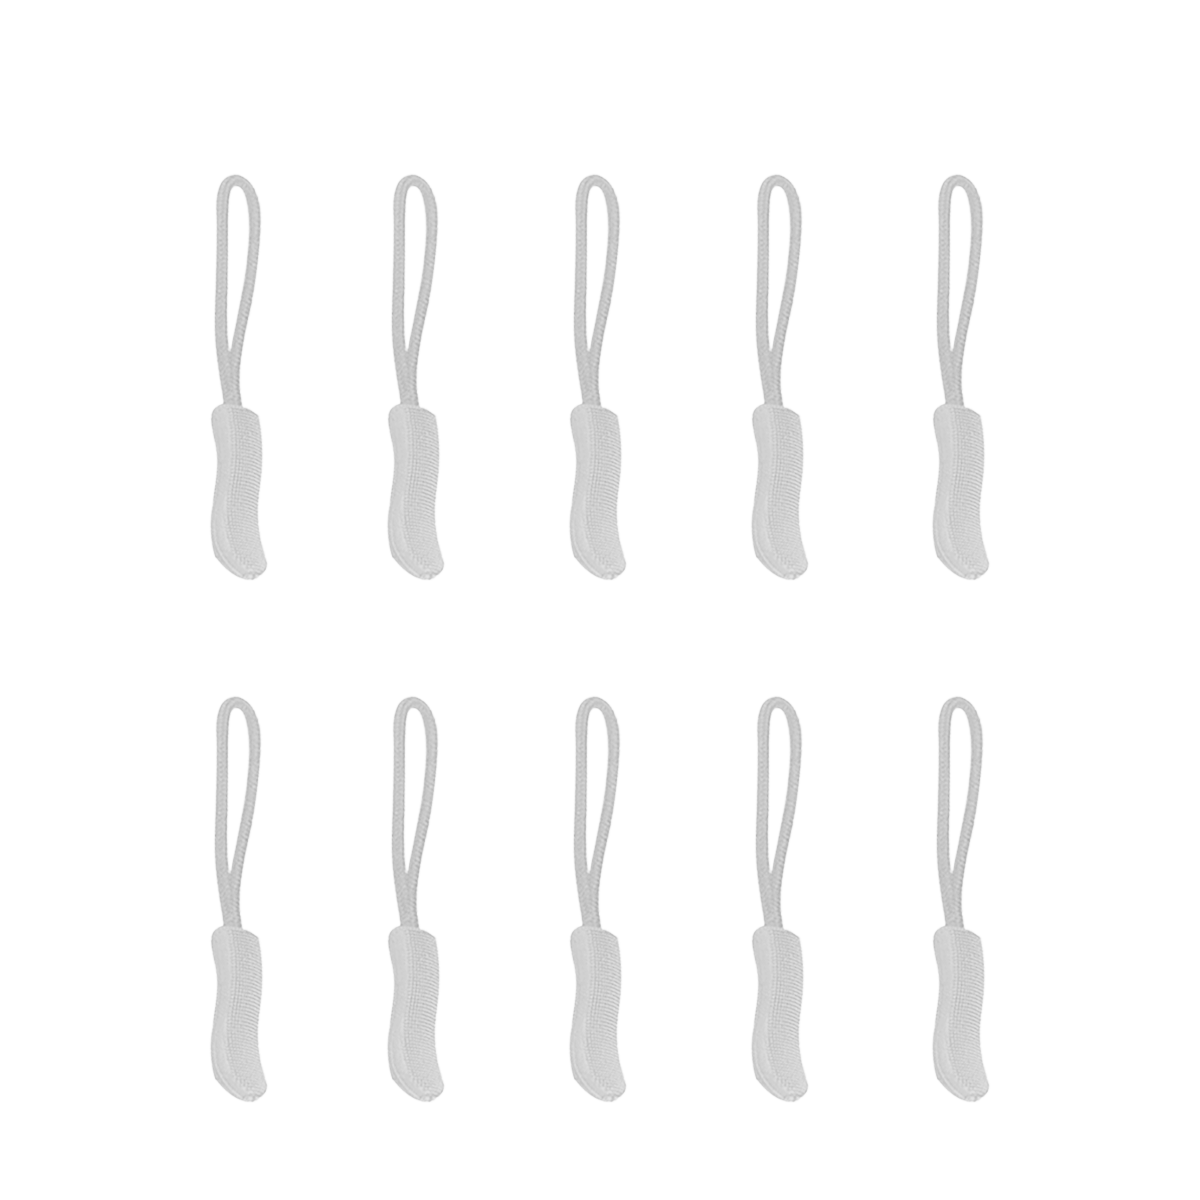 Zipper Pulls Replacement 30pc Extension Cord Handle Fix Tag